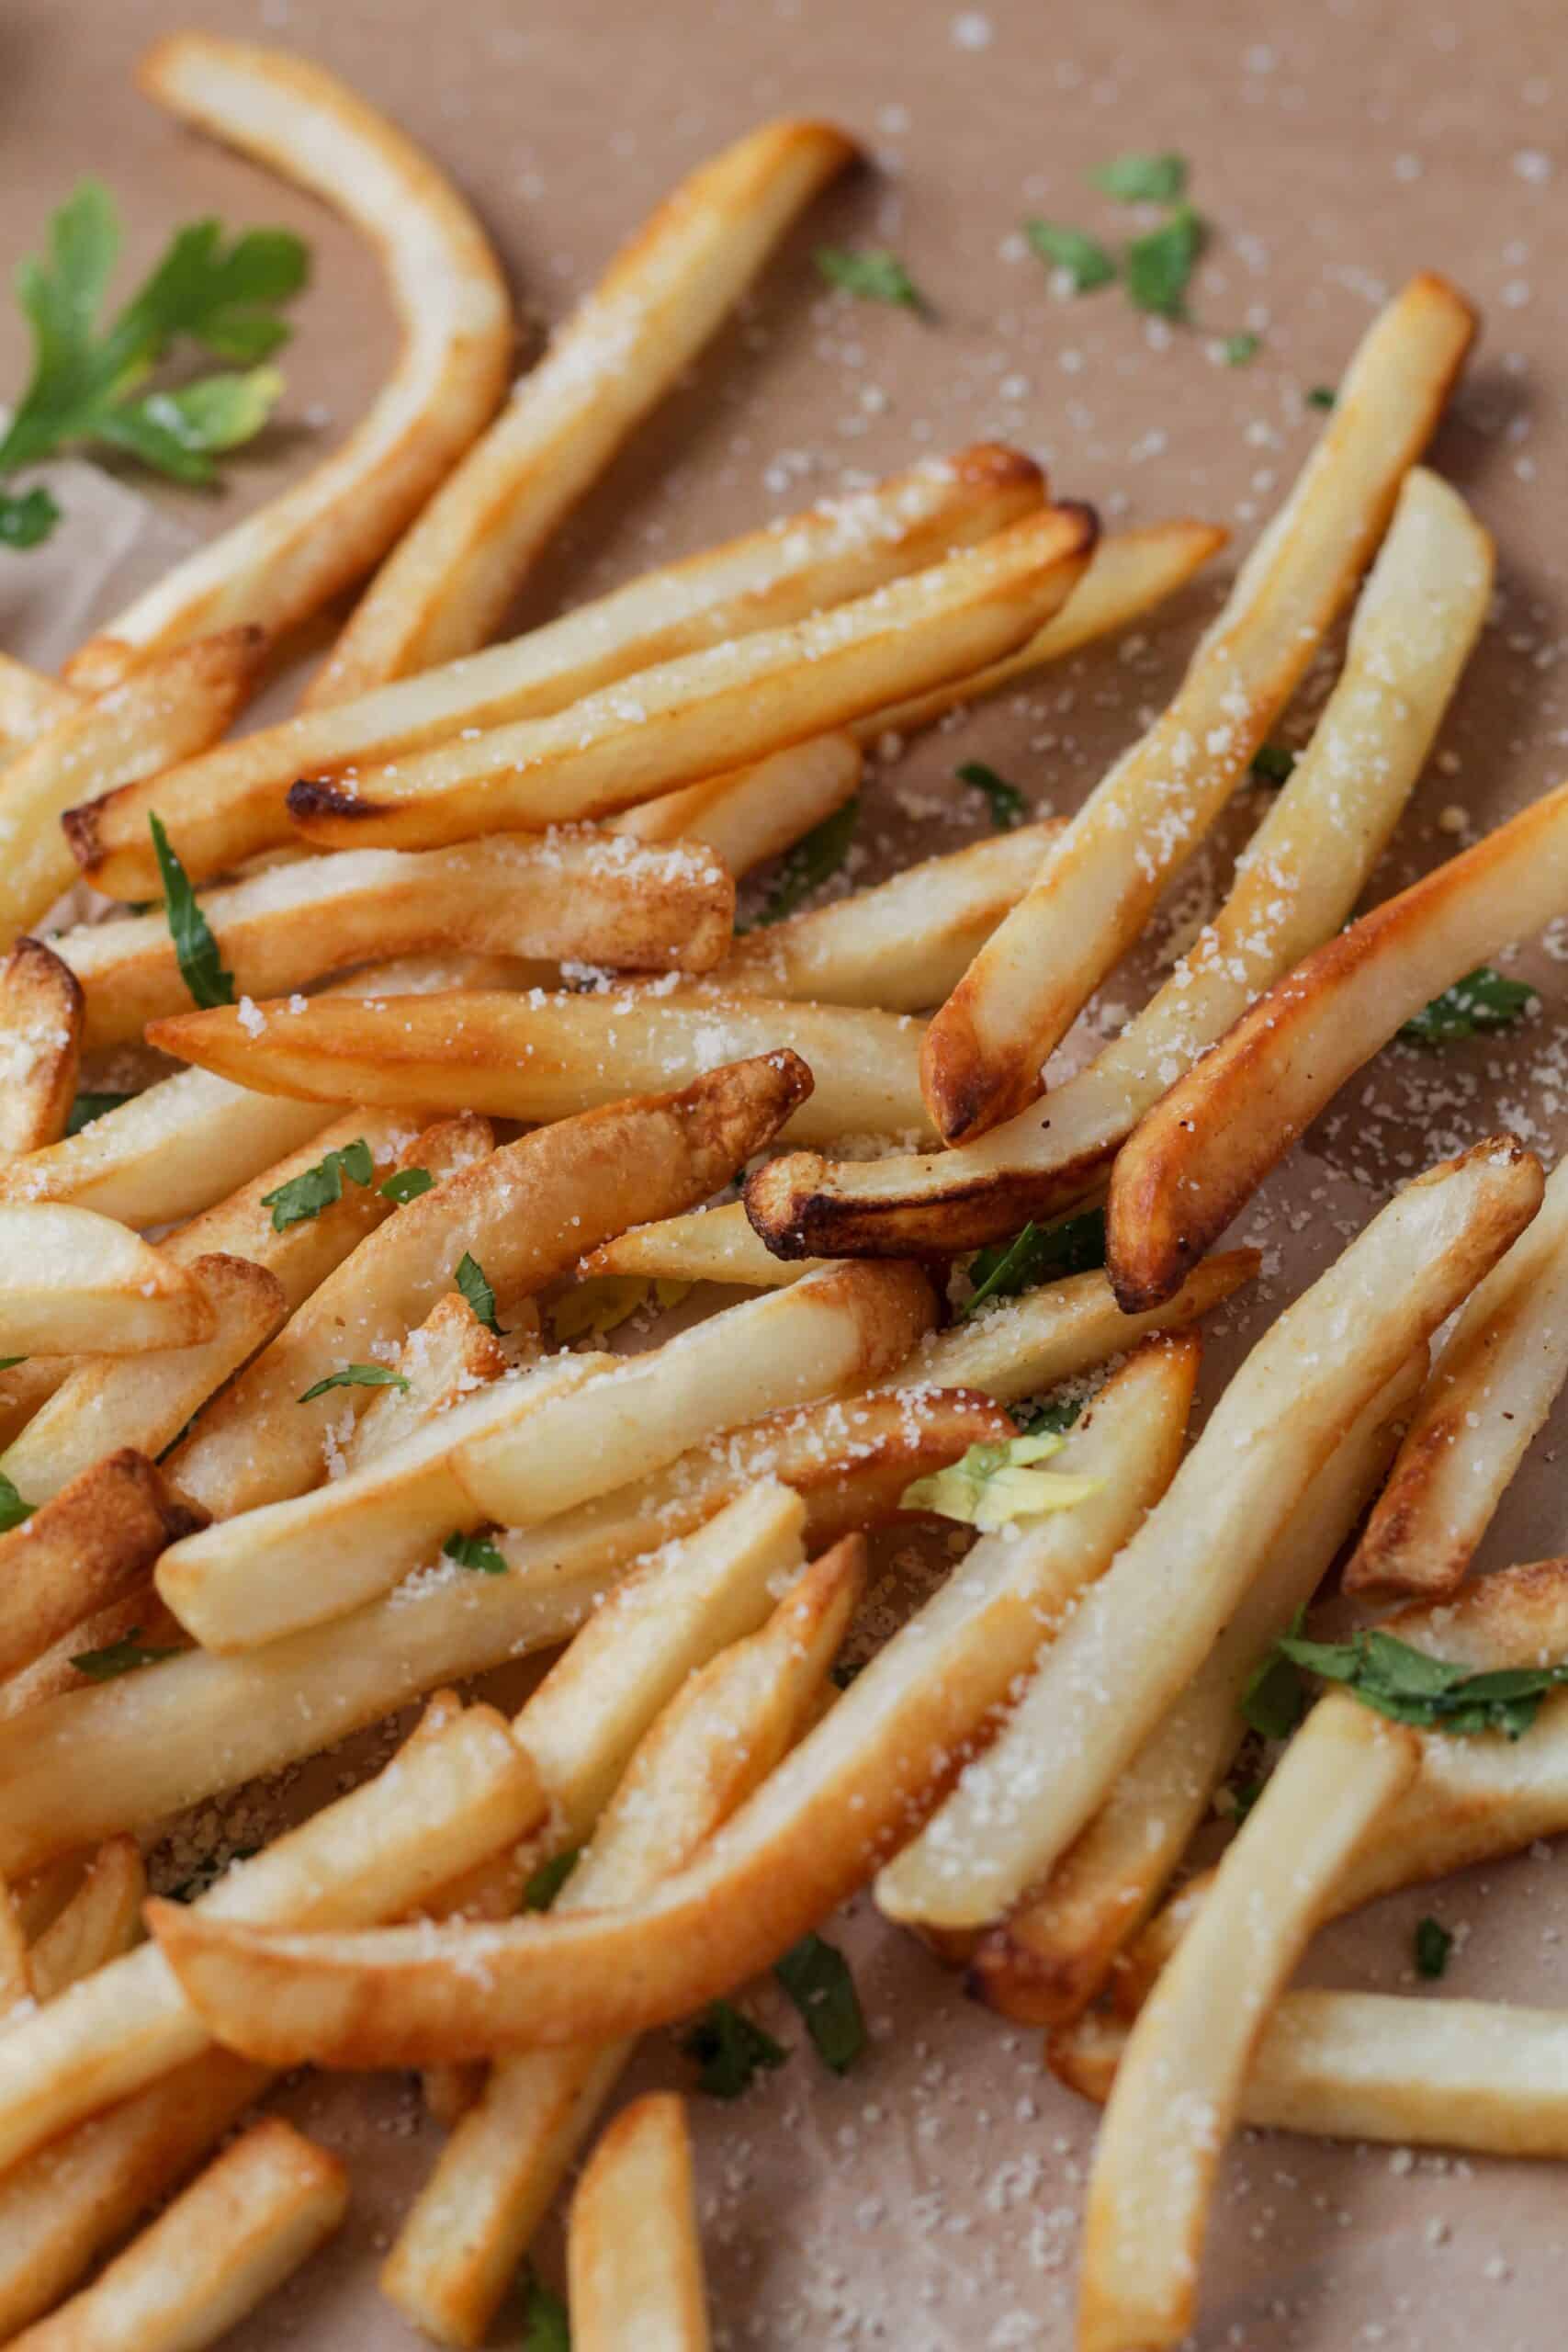 Golden brown French fries scattered on brown paper sprinkled with green parsley and parmesan cheese.